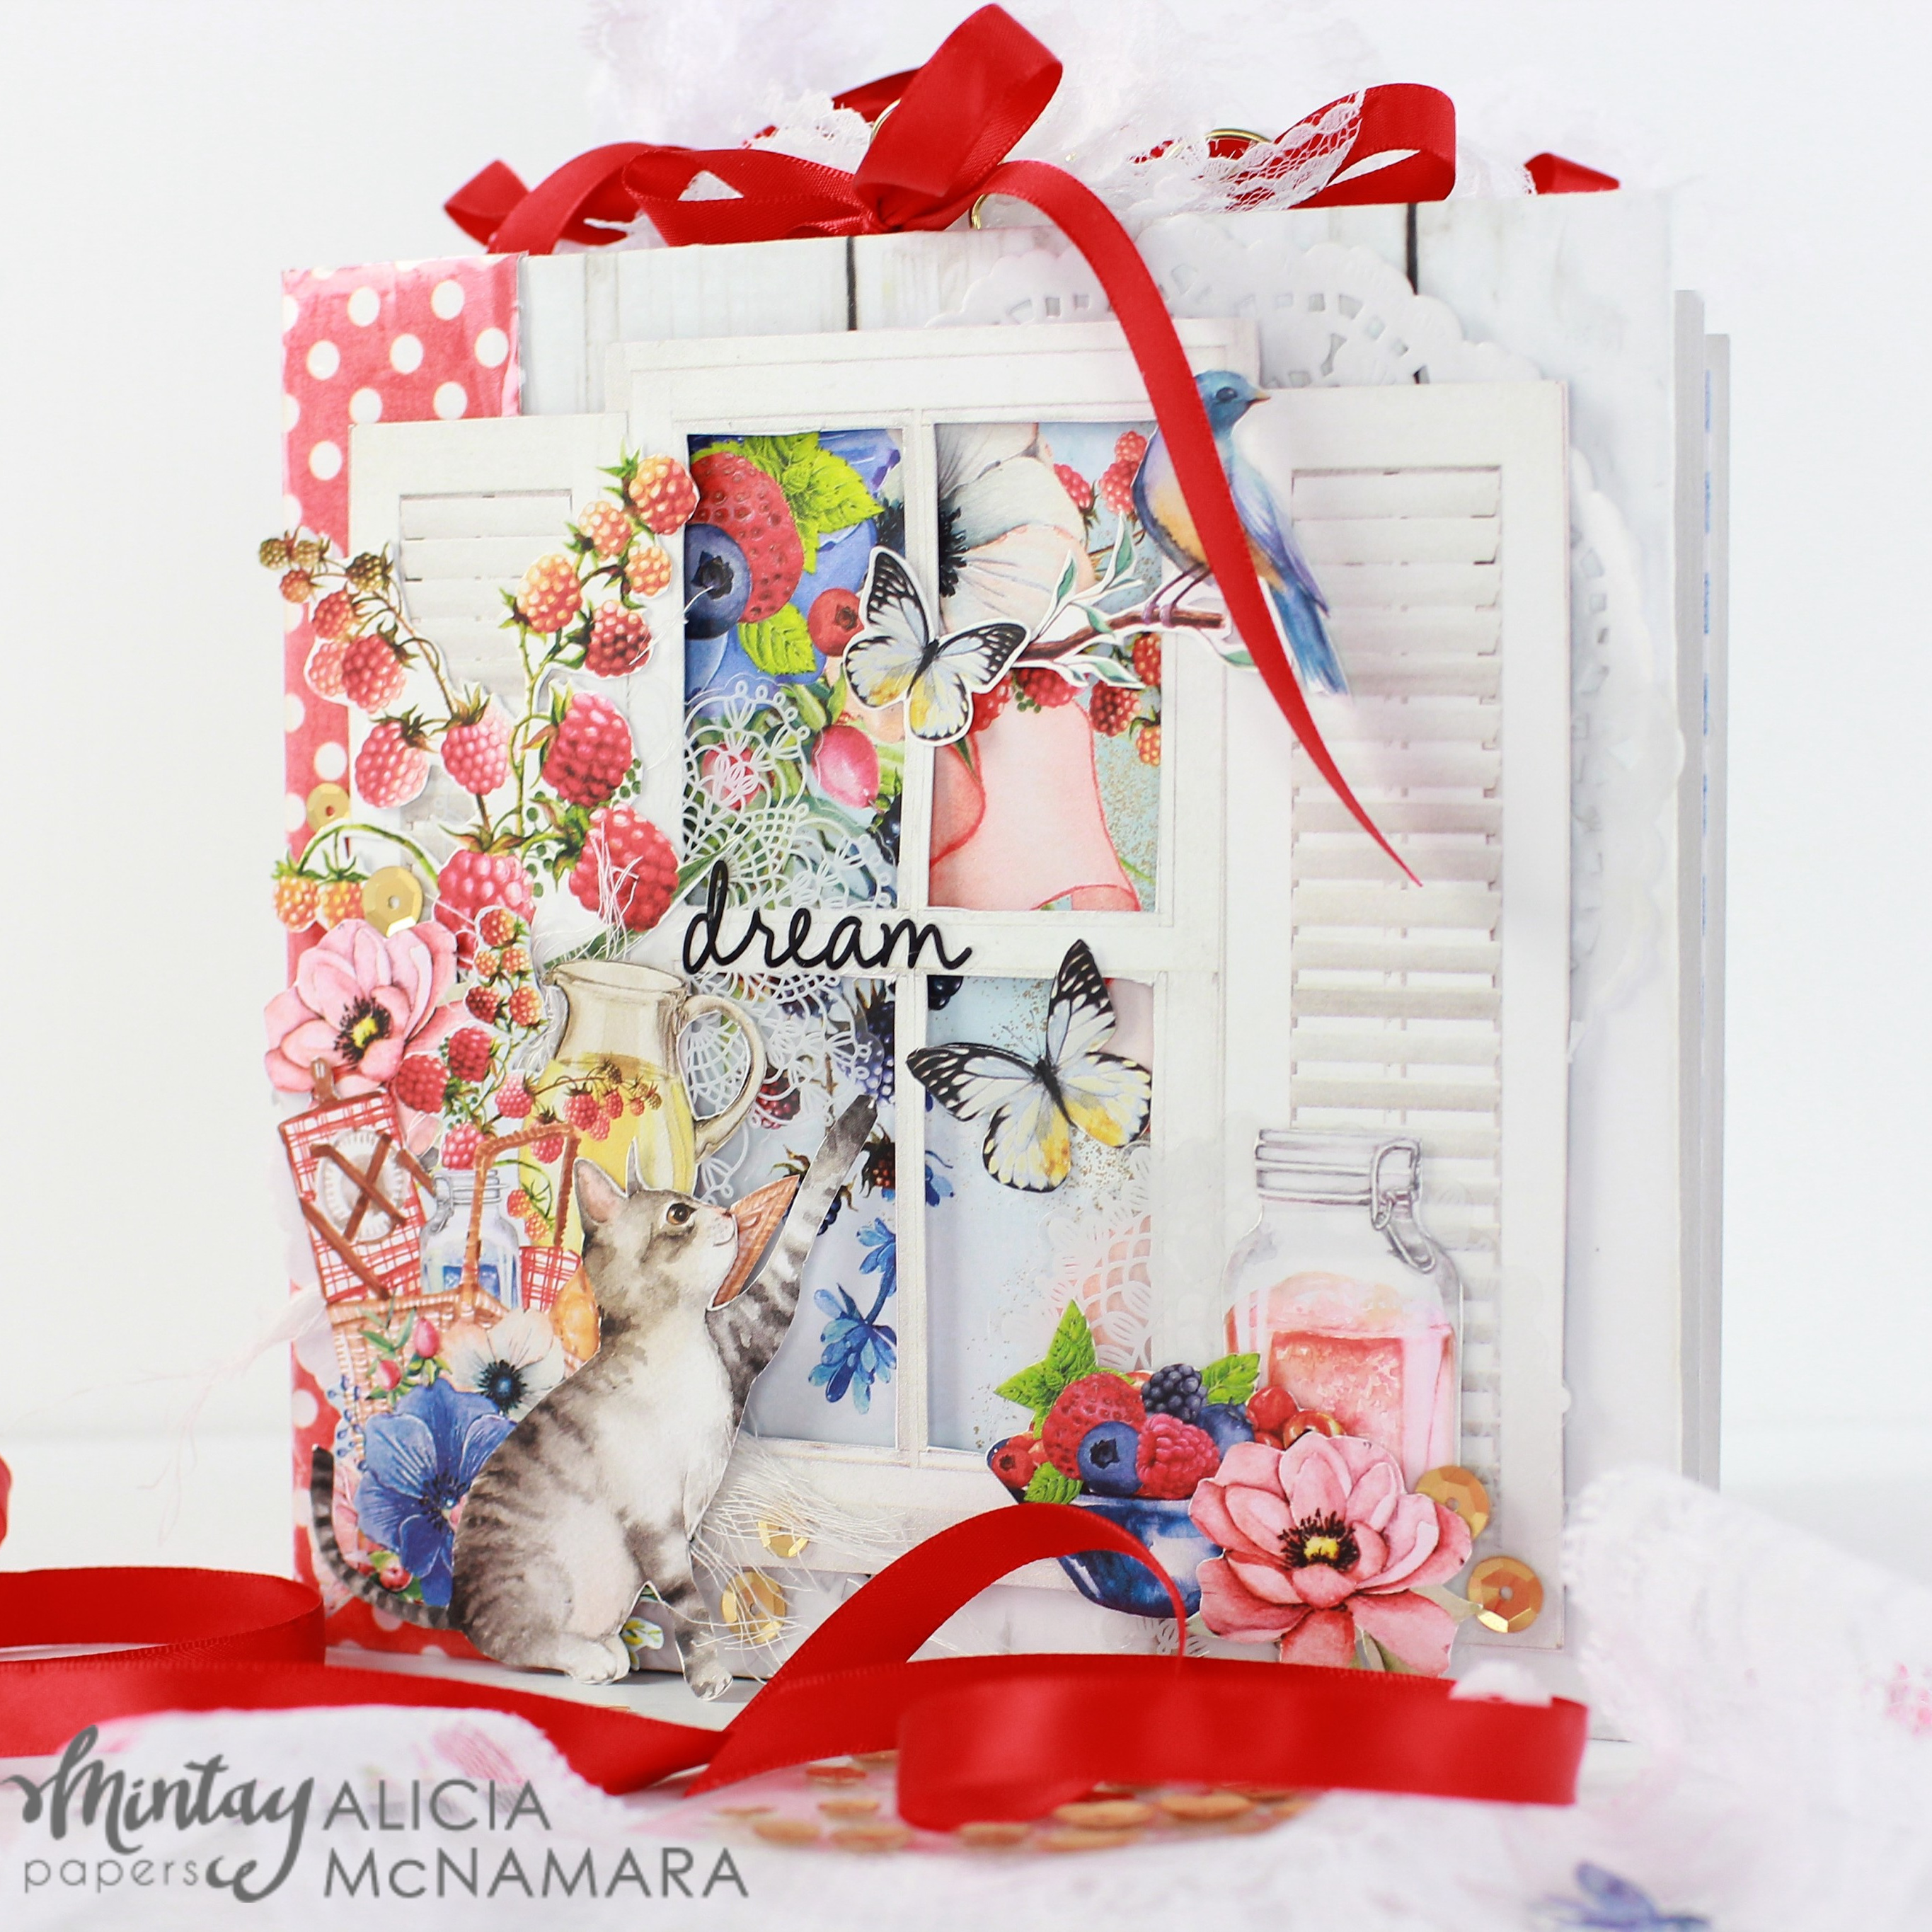 How to make a Mini Album, from scratch. Step-by-step Tutorial Videos and Printable Tutorials are FREE. This album was made using MINTAY Berry Licious Papers and created by Alicia McNamara.